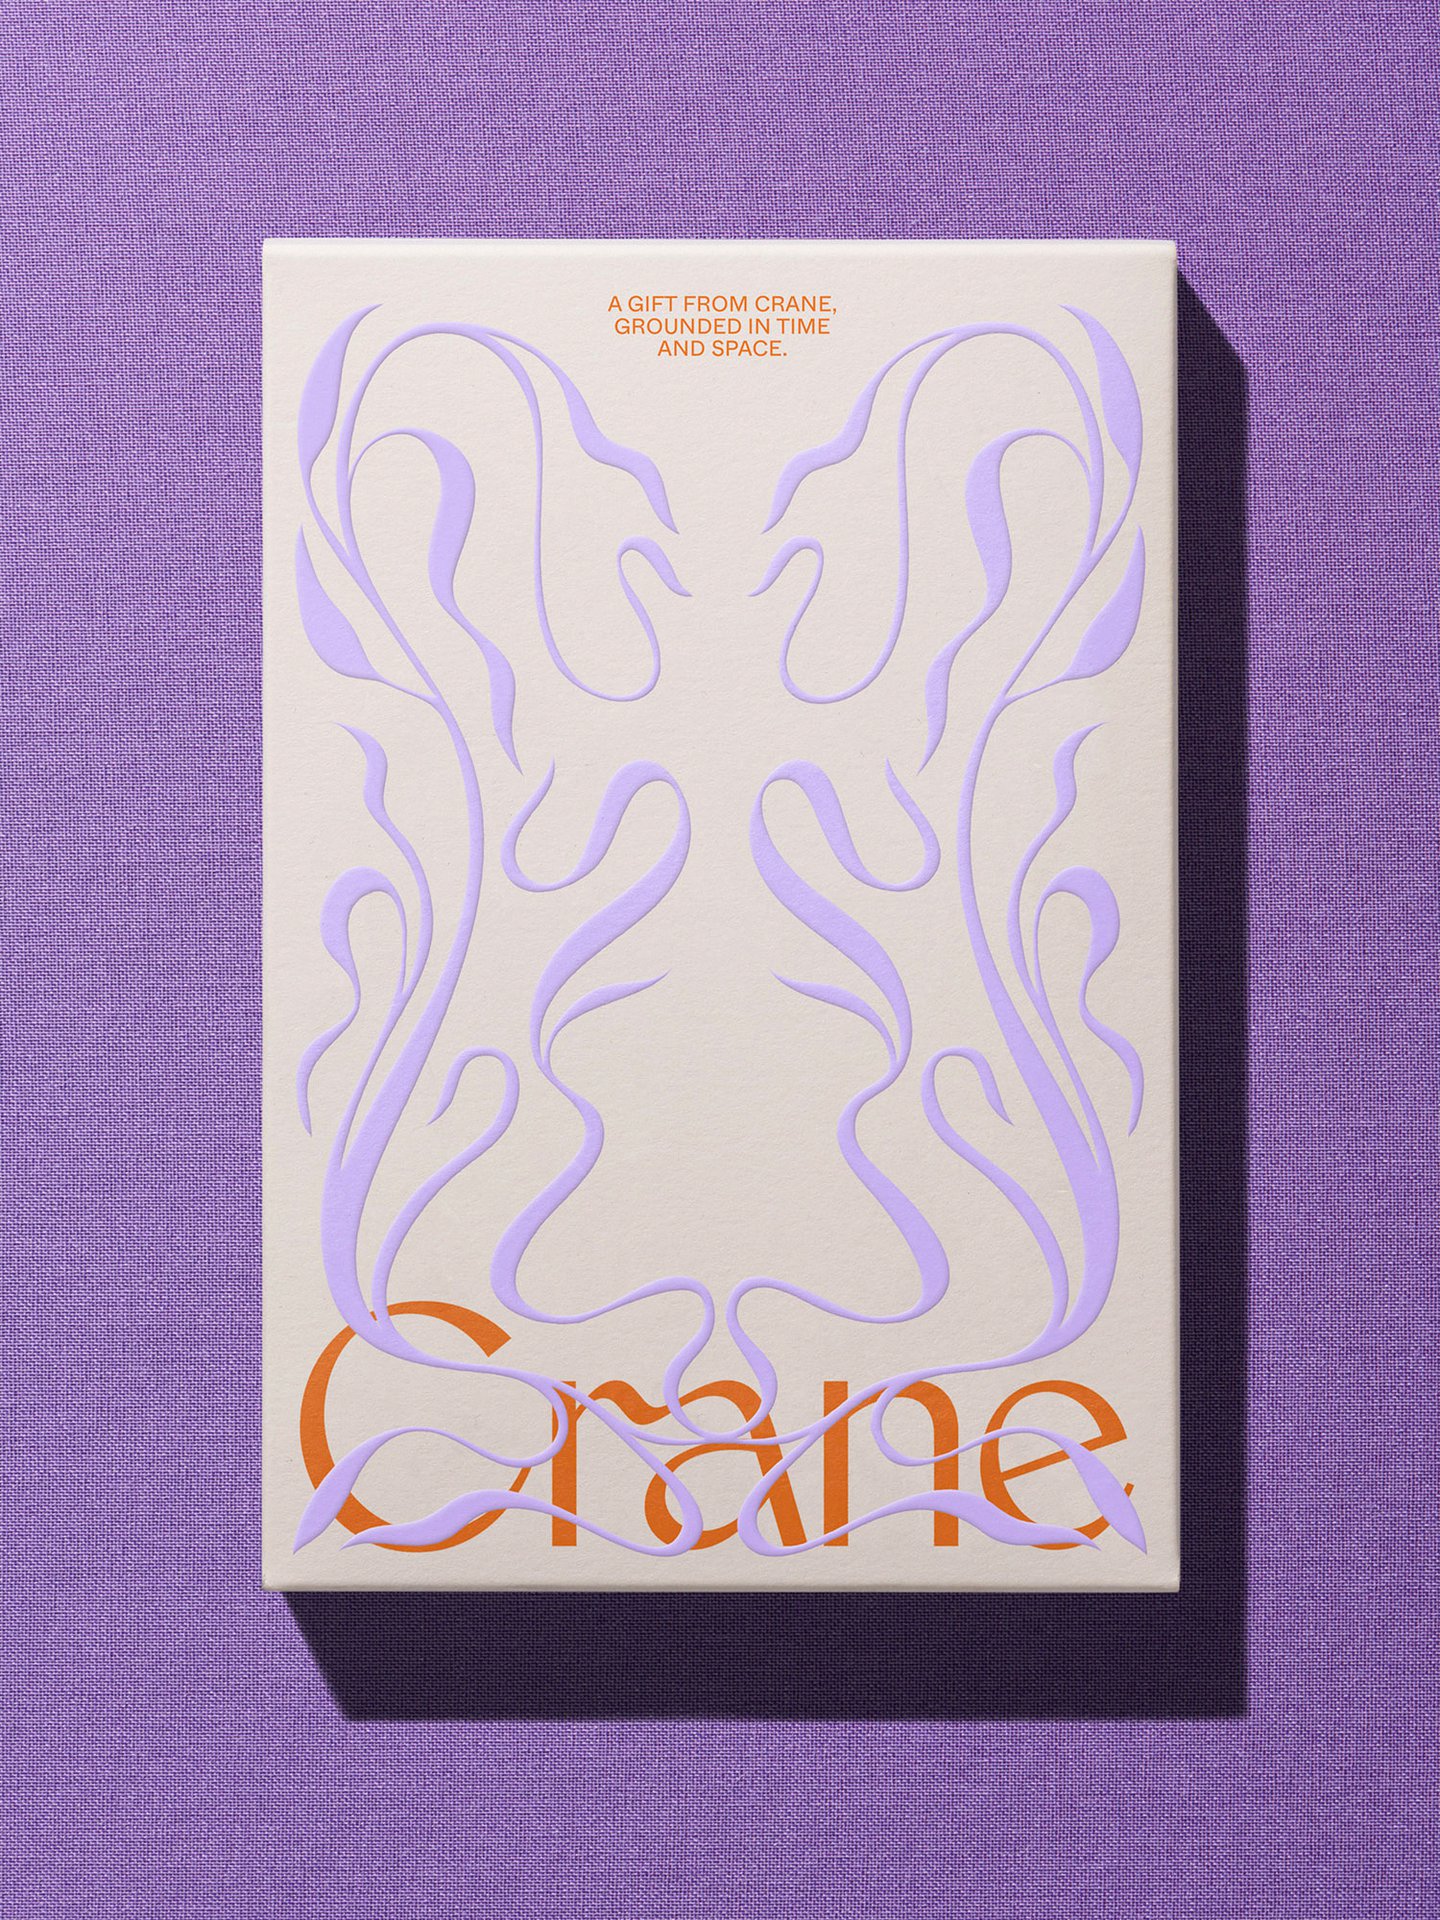 The Crane Paper Company rebrand by Collins looks to Art Nouveau for its  elegant graphics